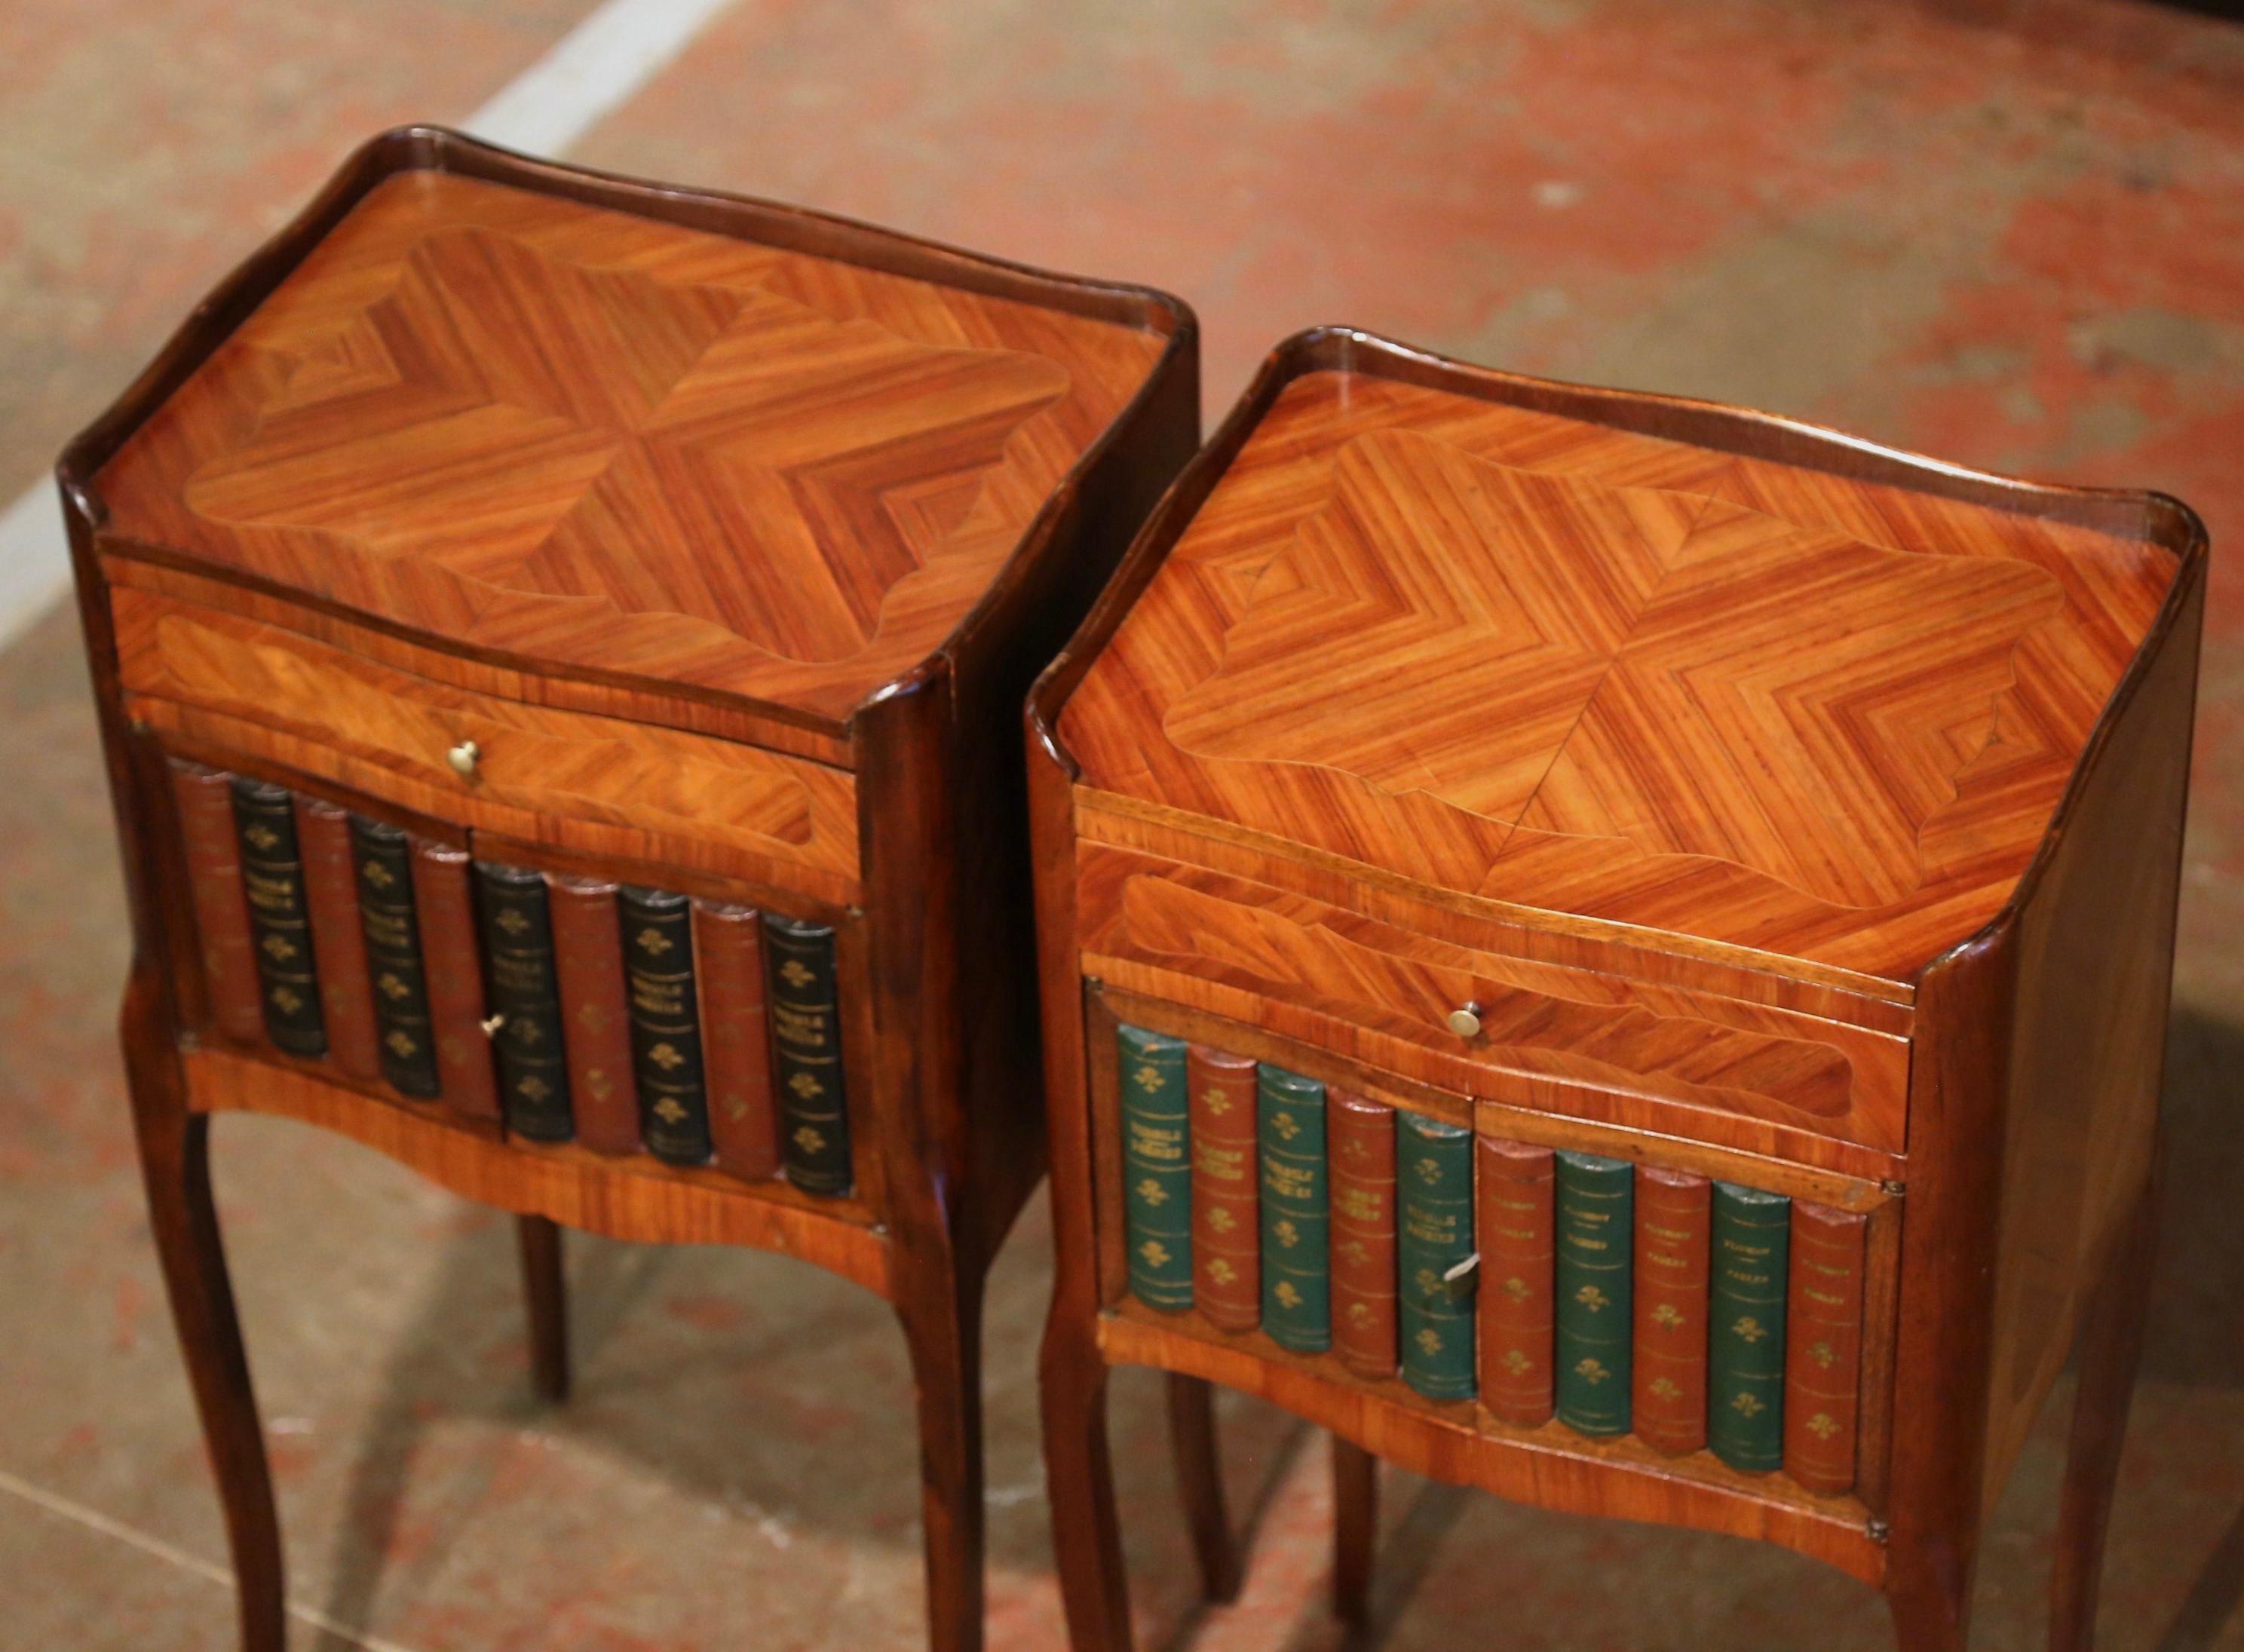 Pair of 19th Century French Walnut Nightstands with Leather Book Spine Doors In Excellent Condition For Sale In Dallas, TX